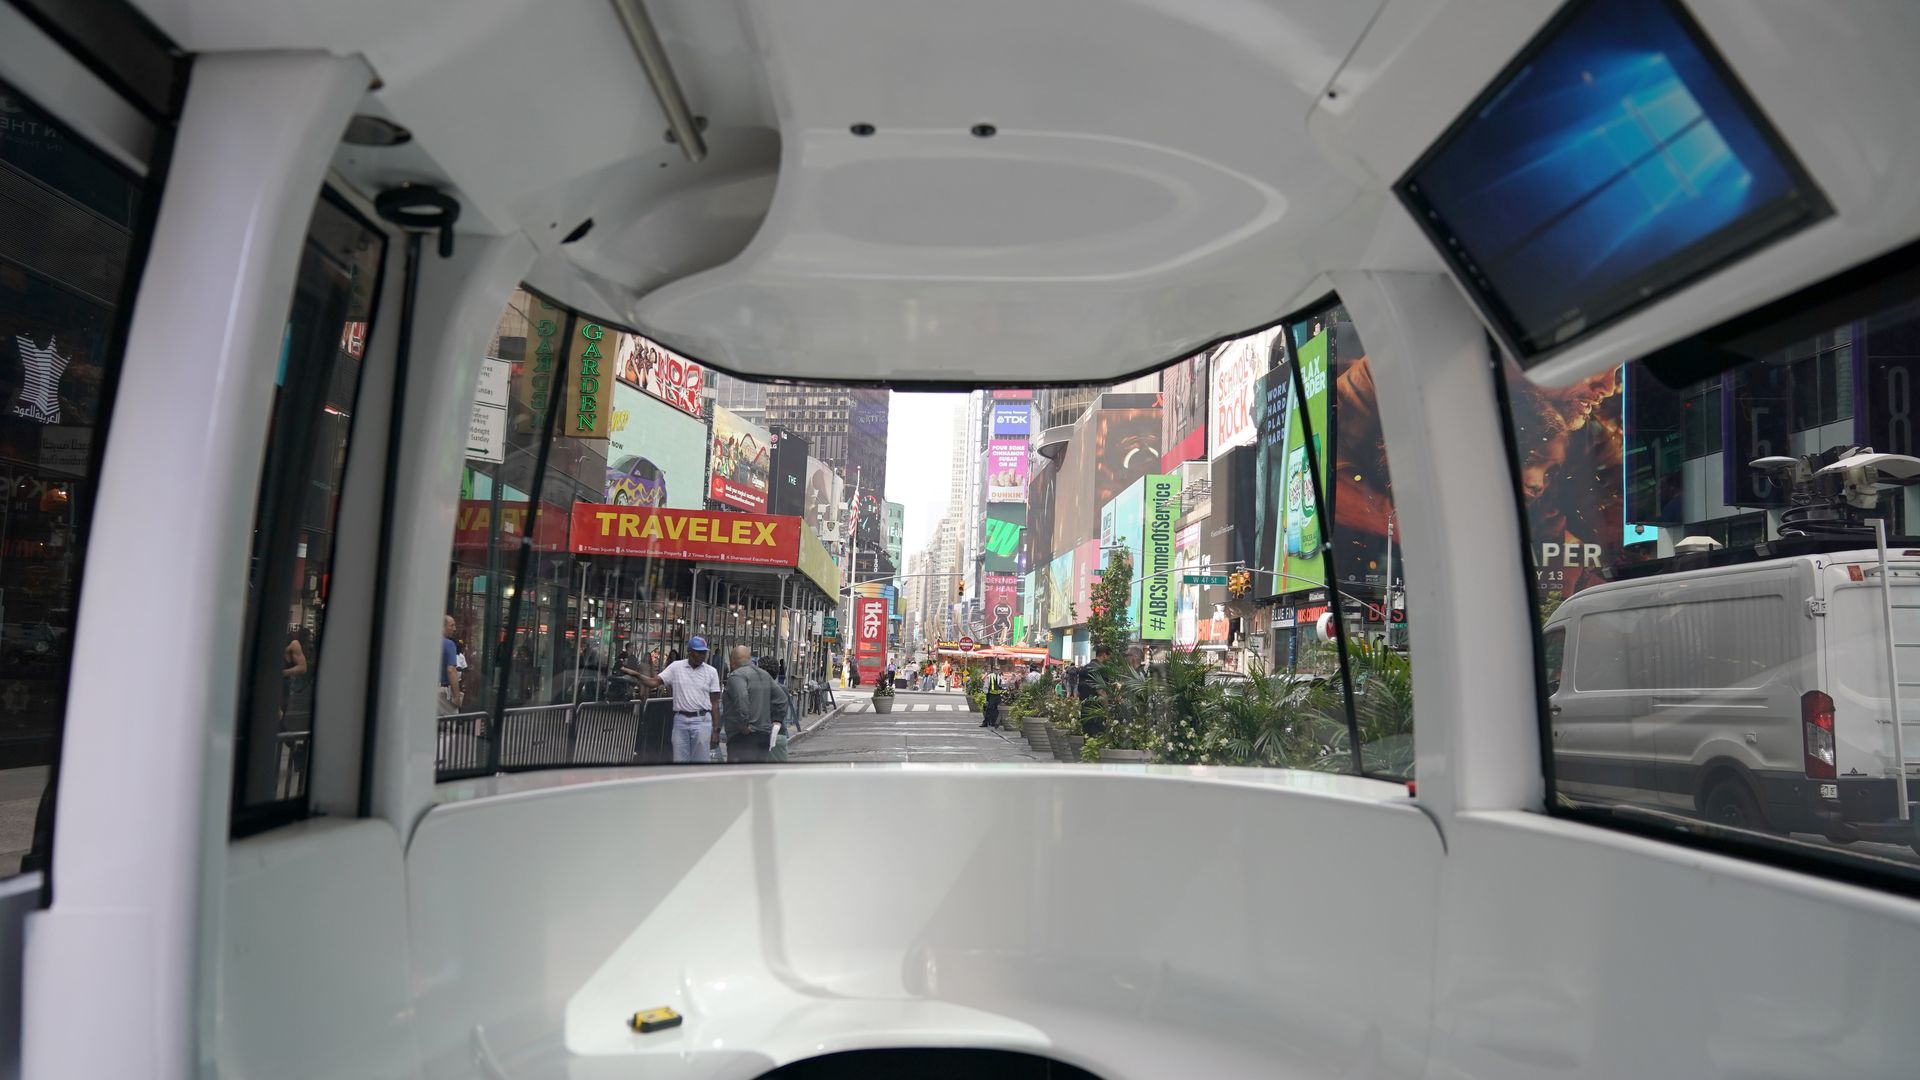 A view of the self-driving shuttle is seen in Times Square July 17, 2018 in New York